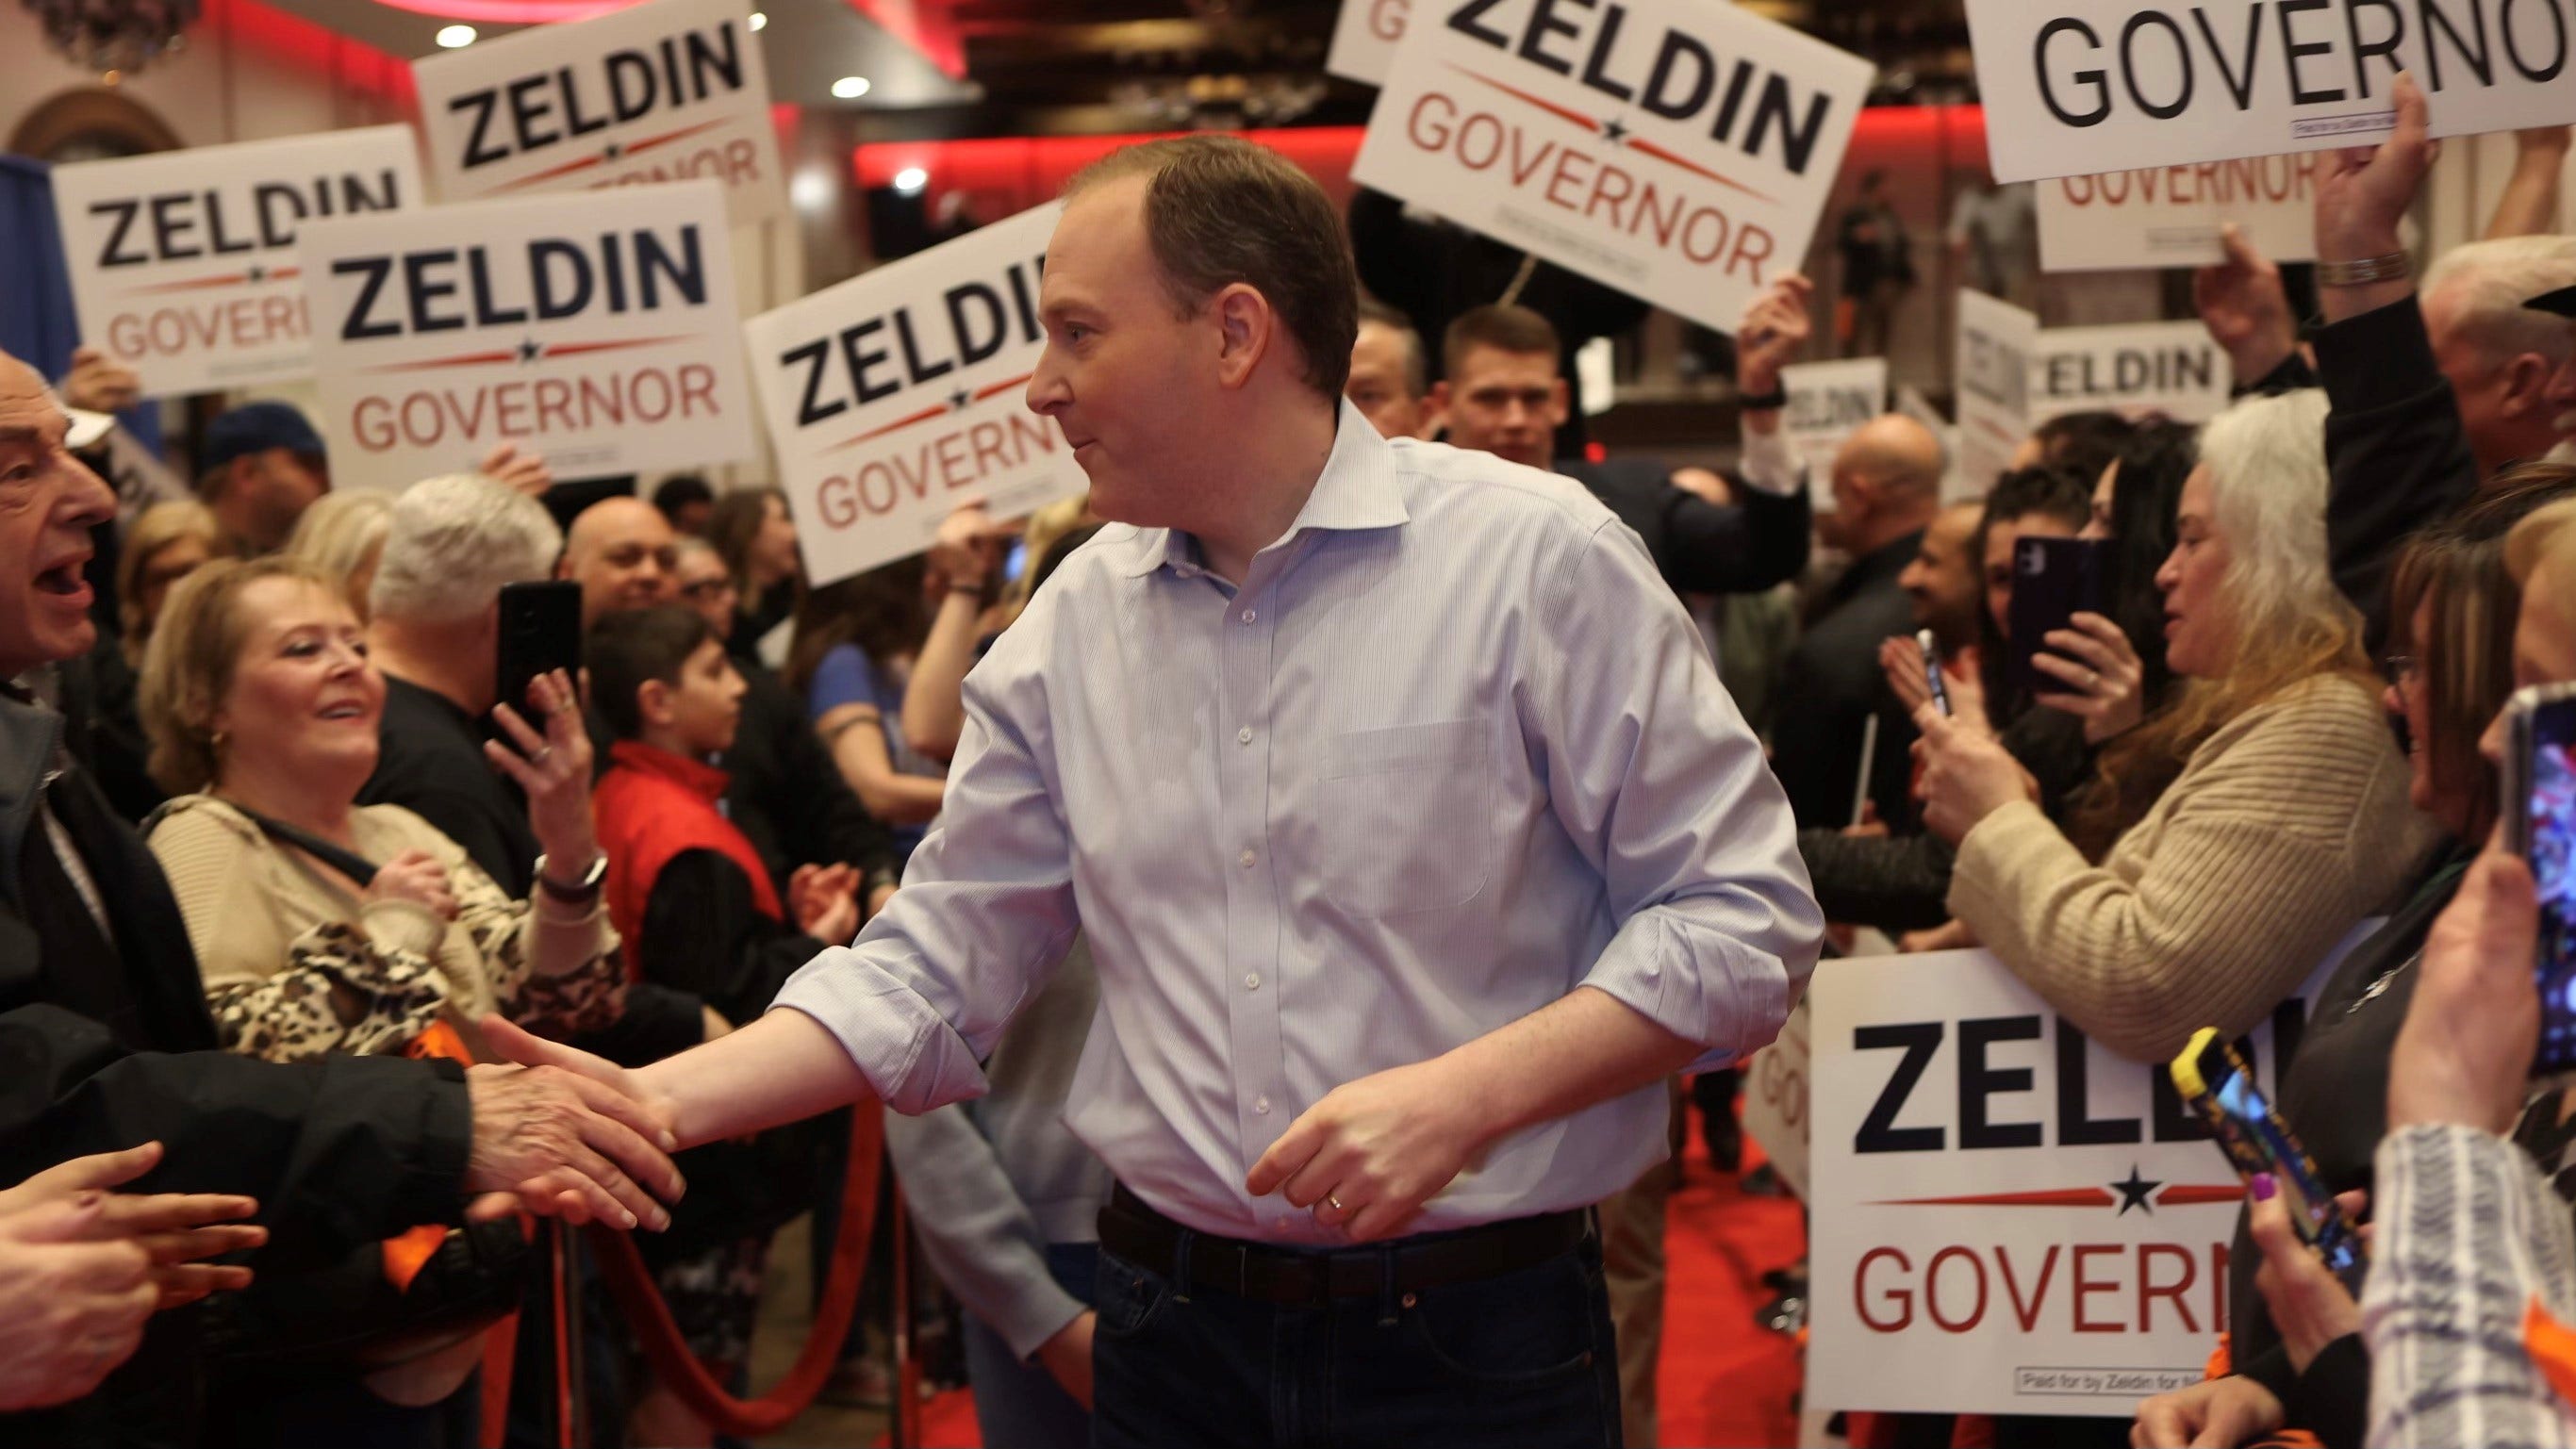 Mets fan Lee Zeldin gets backing from a top Yankees executive in New York's  GOP gubernatorial primary | Fox News